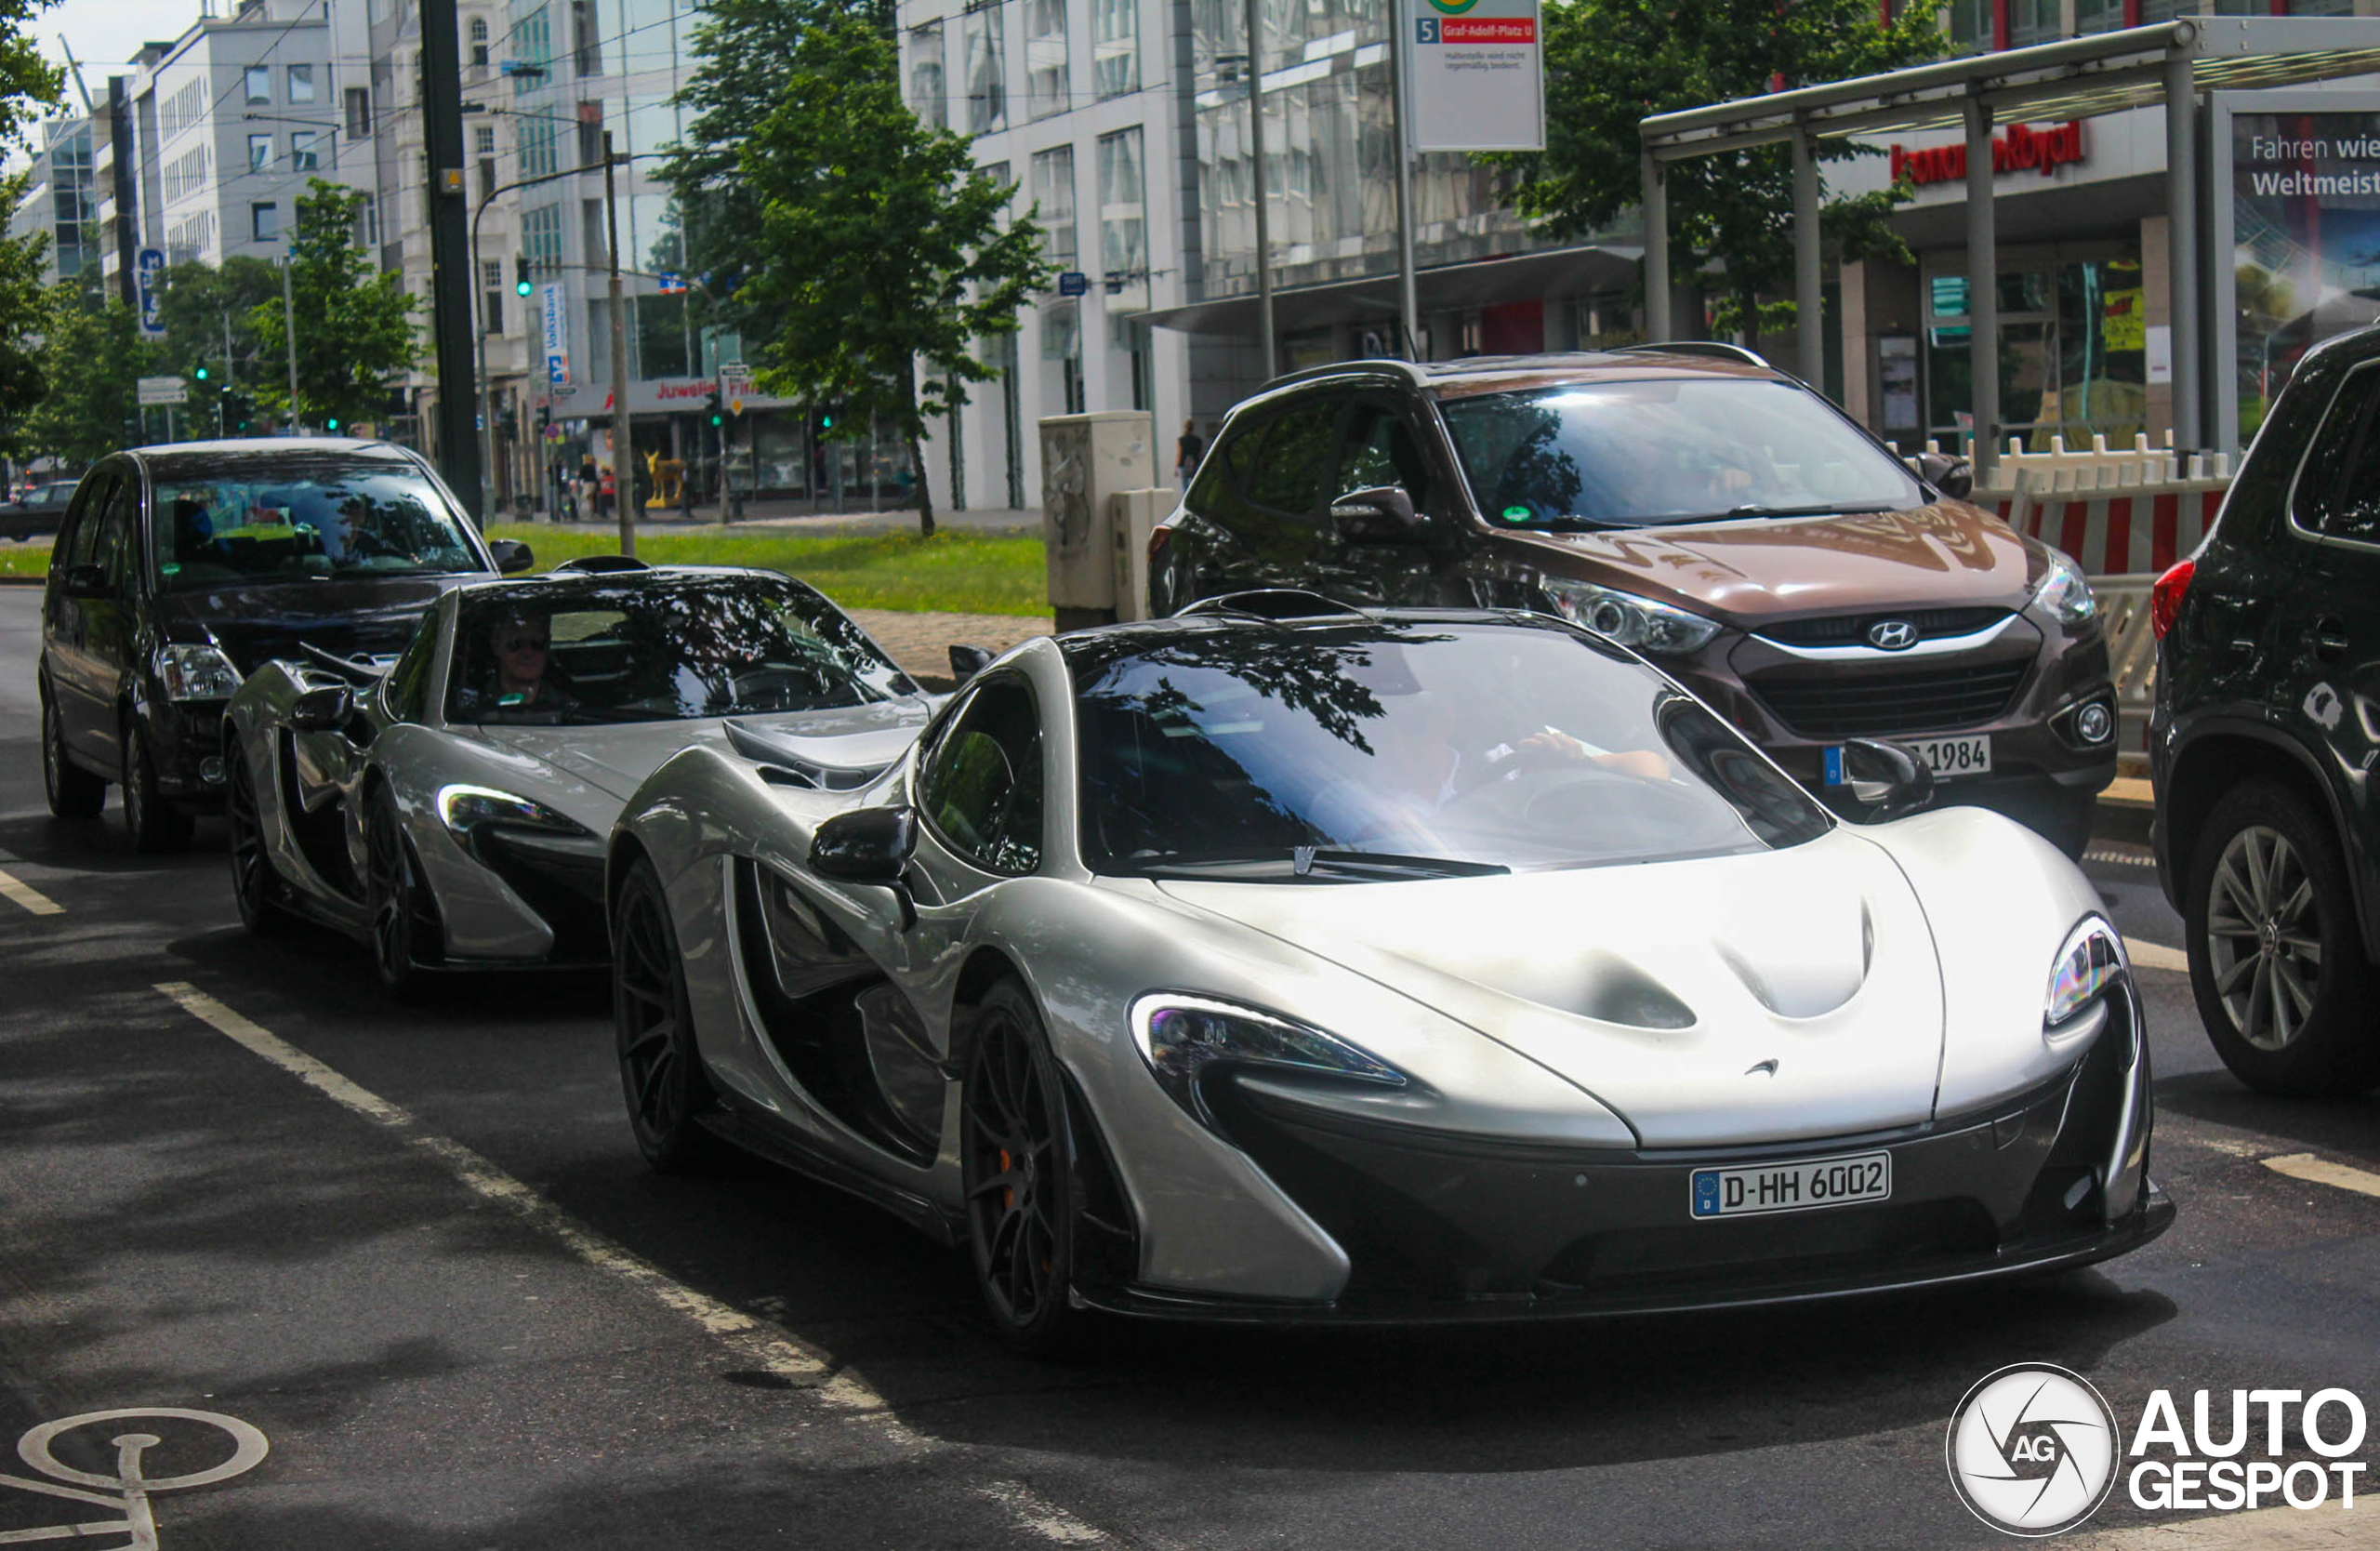 Not one but exactly two silver P1s were spotted in Düsseldorf.